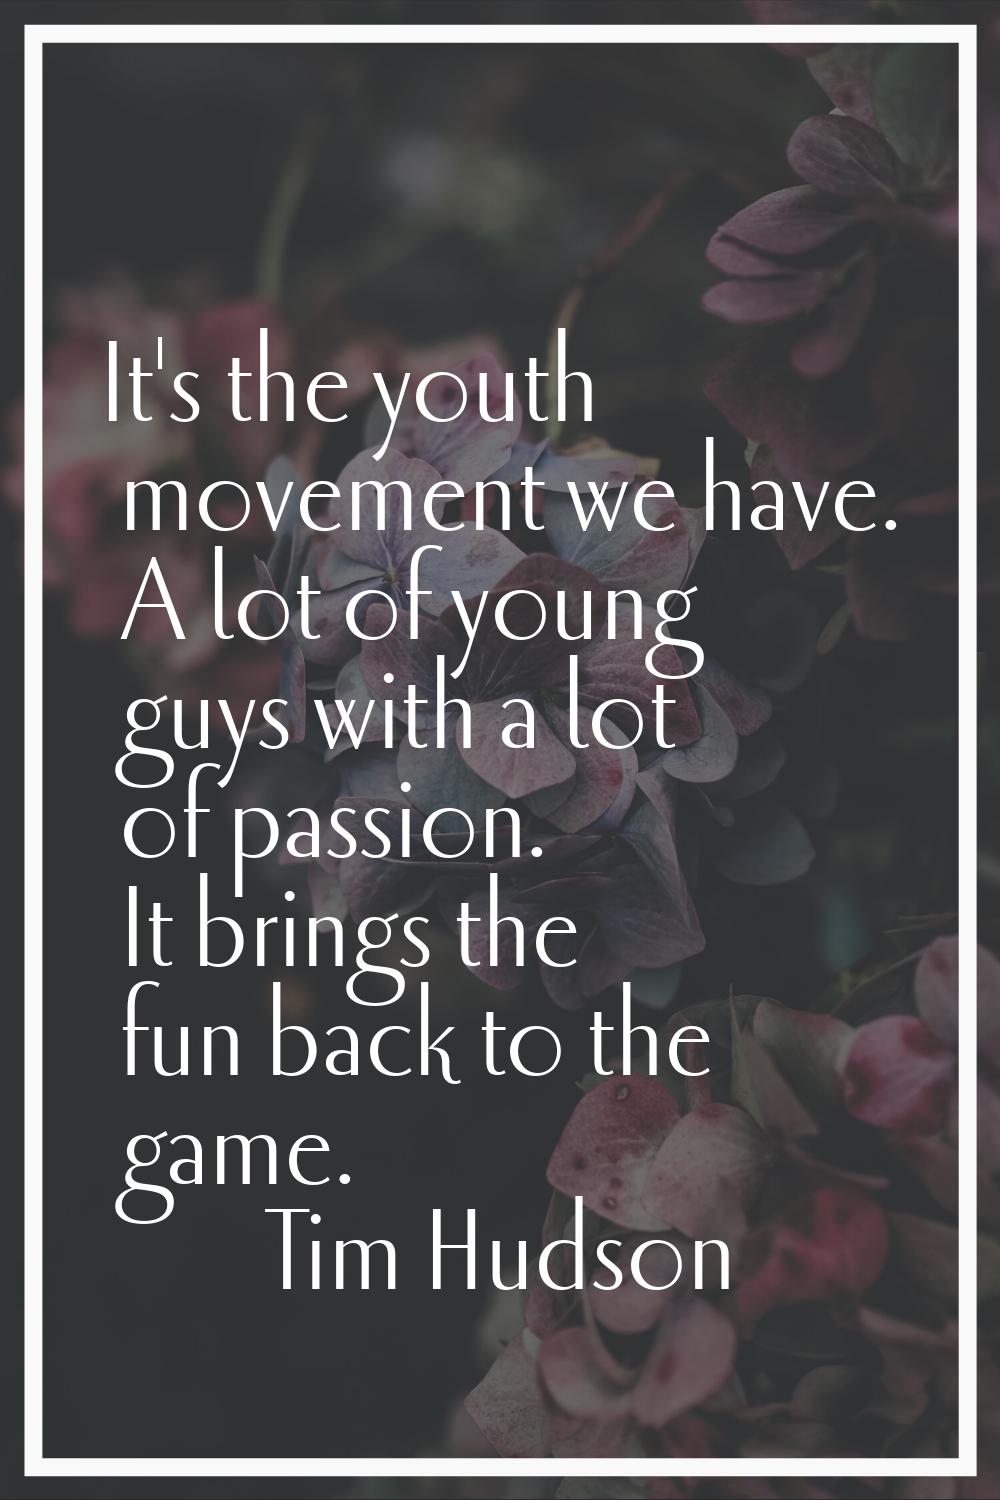 It's the youth movement we have. A lot of young guys with a lot of passion. It brings the fun back 